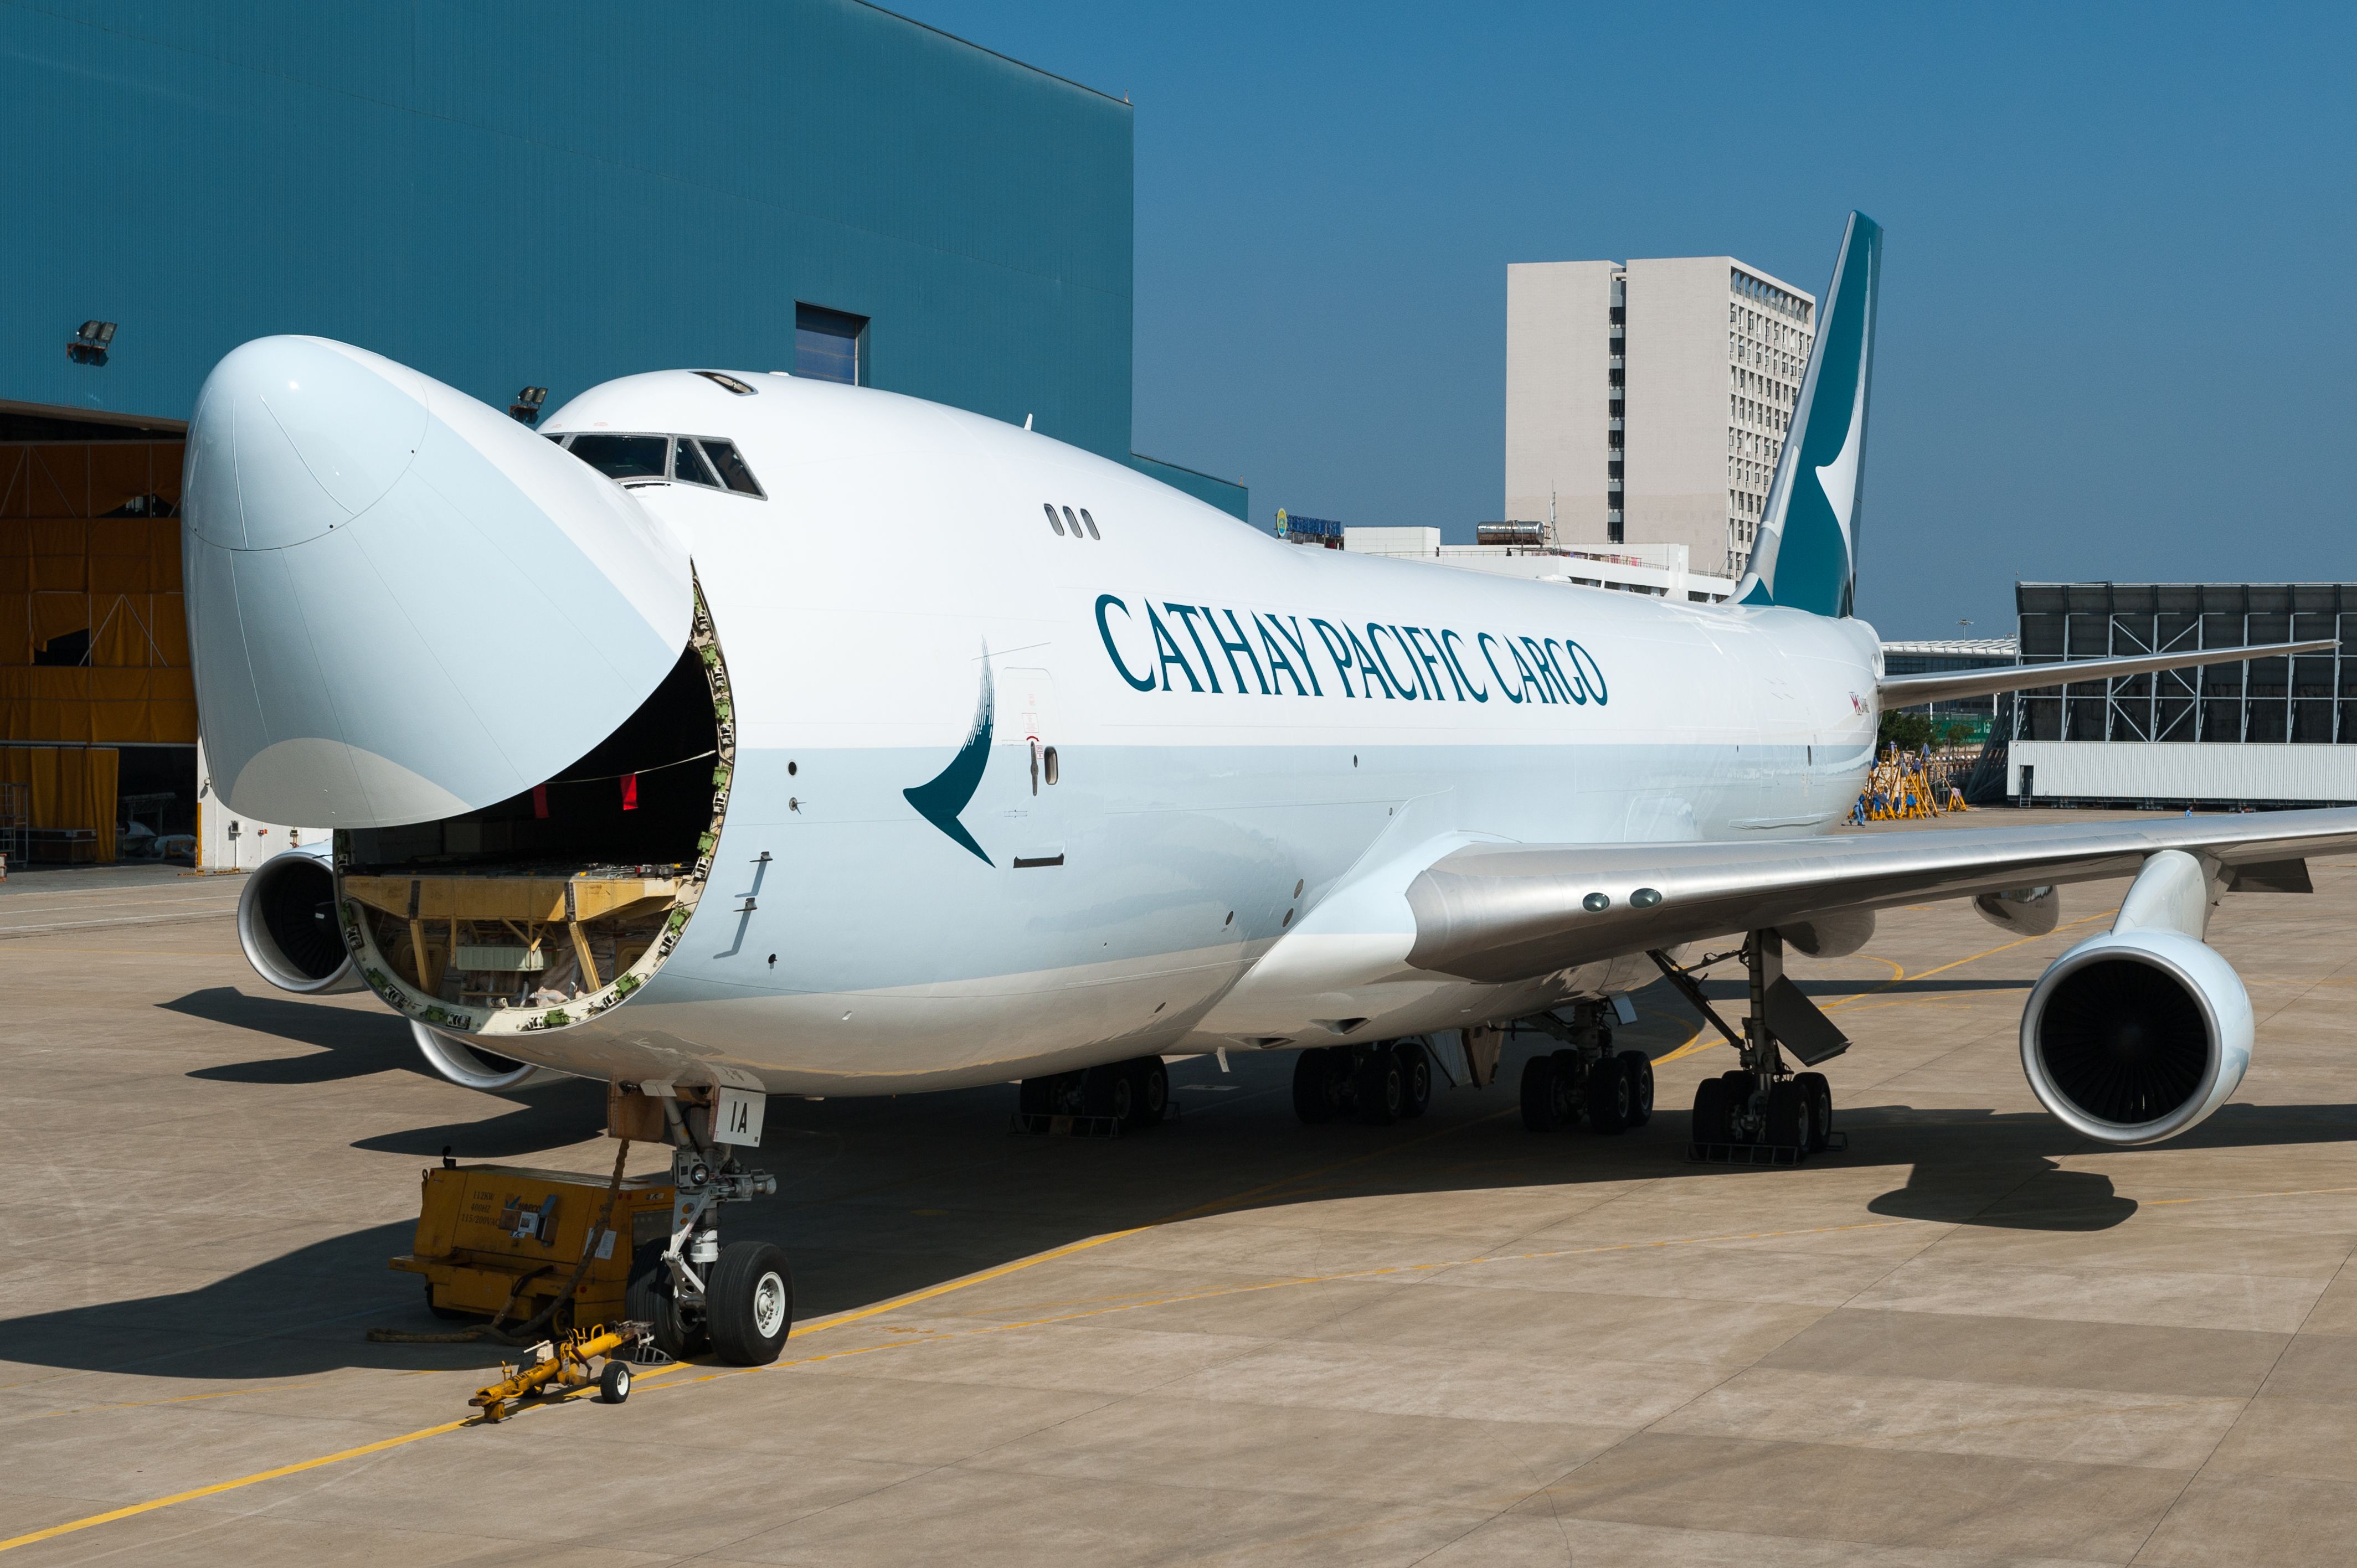 Cathay Pacific cargo Boeing 747 on apron being loaded 